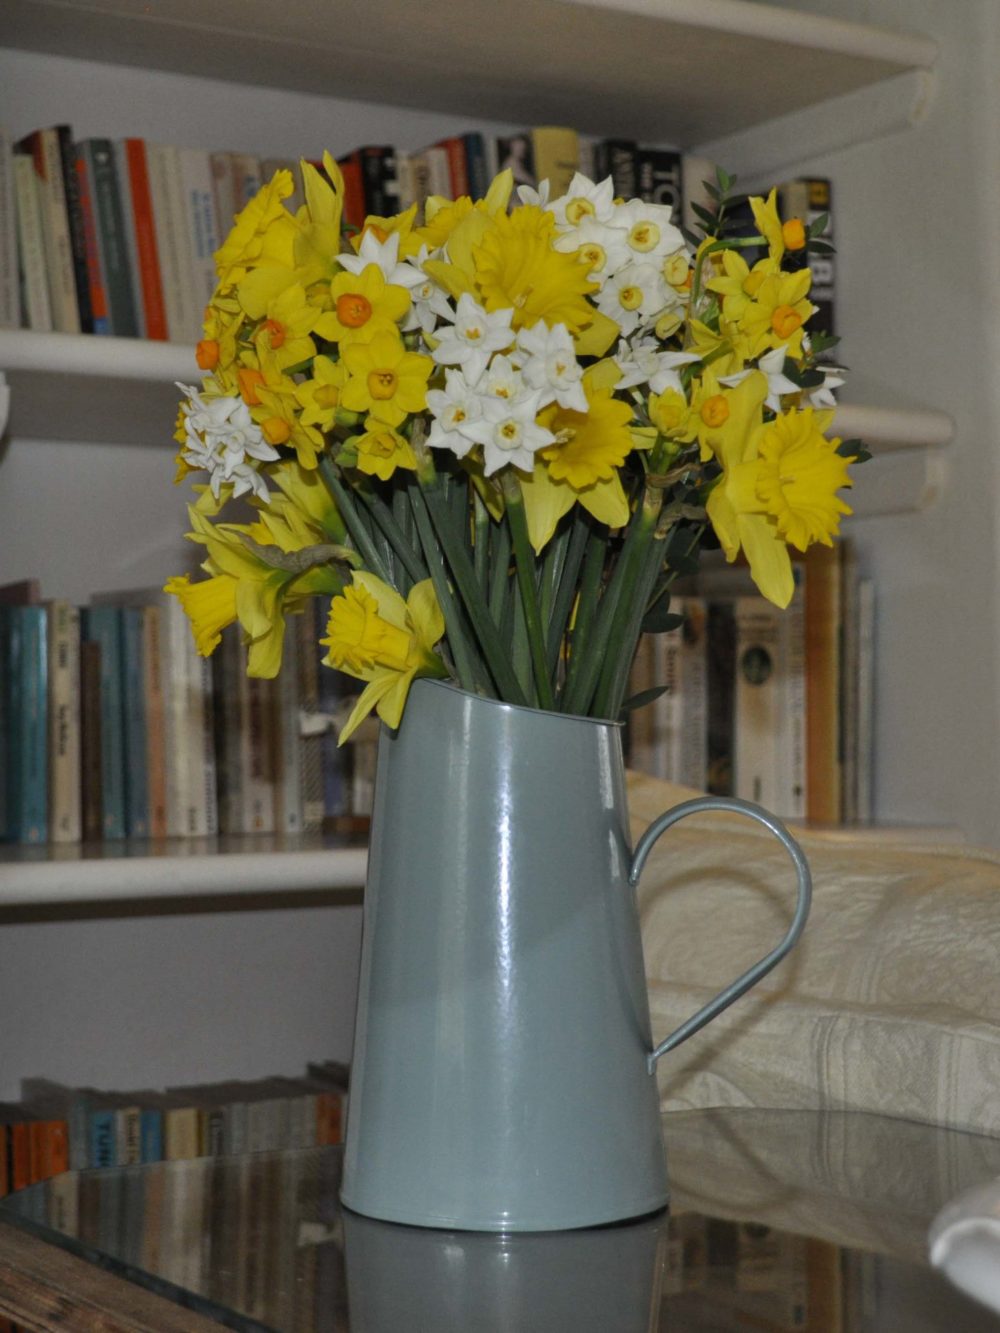 Daffodils and Narcissus mix - Cornish Blooms